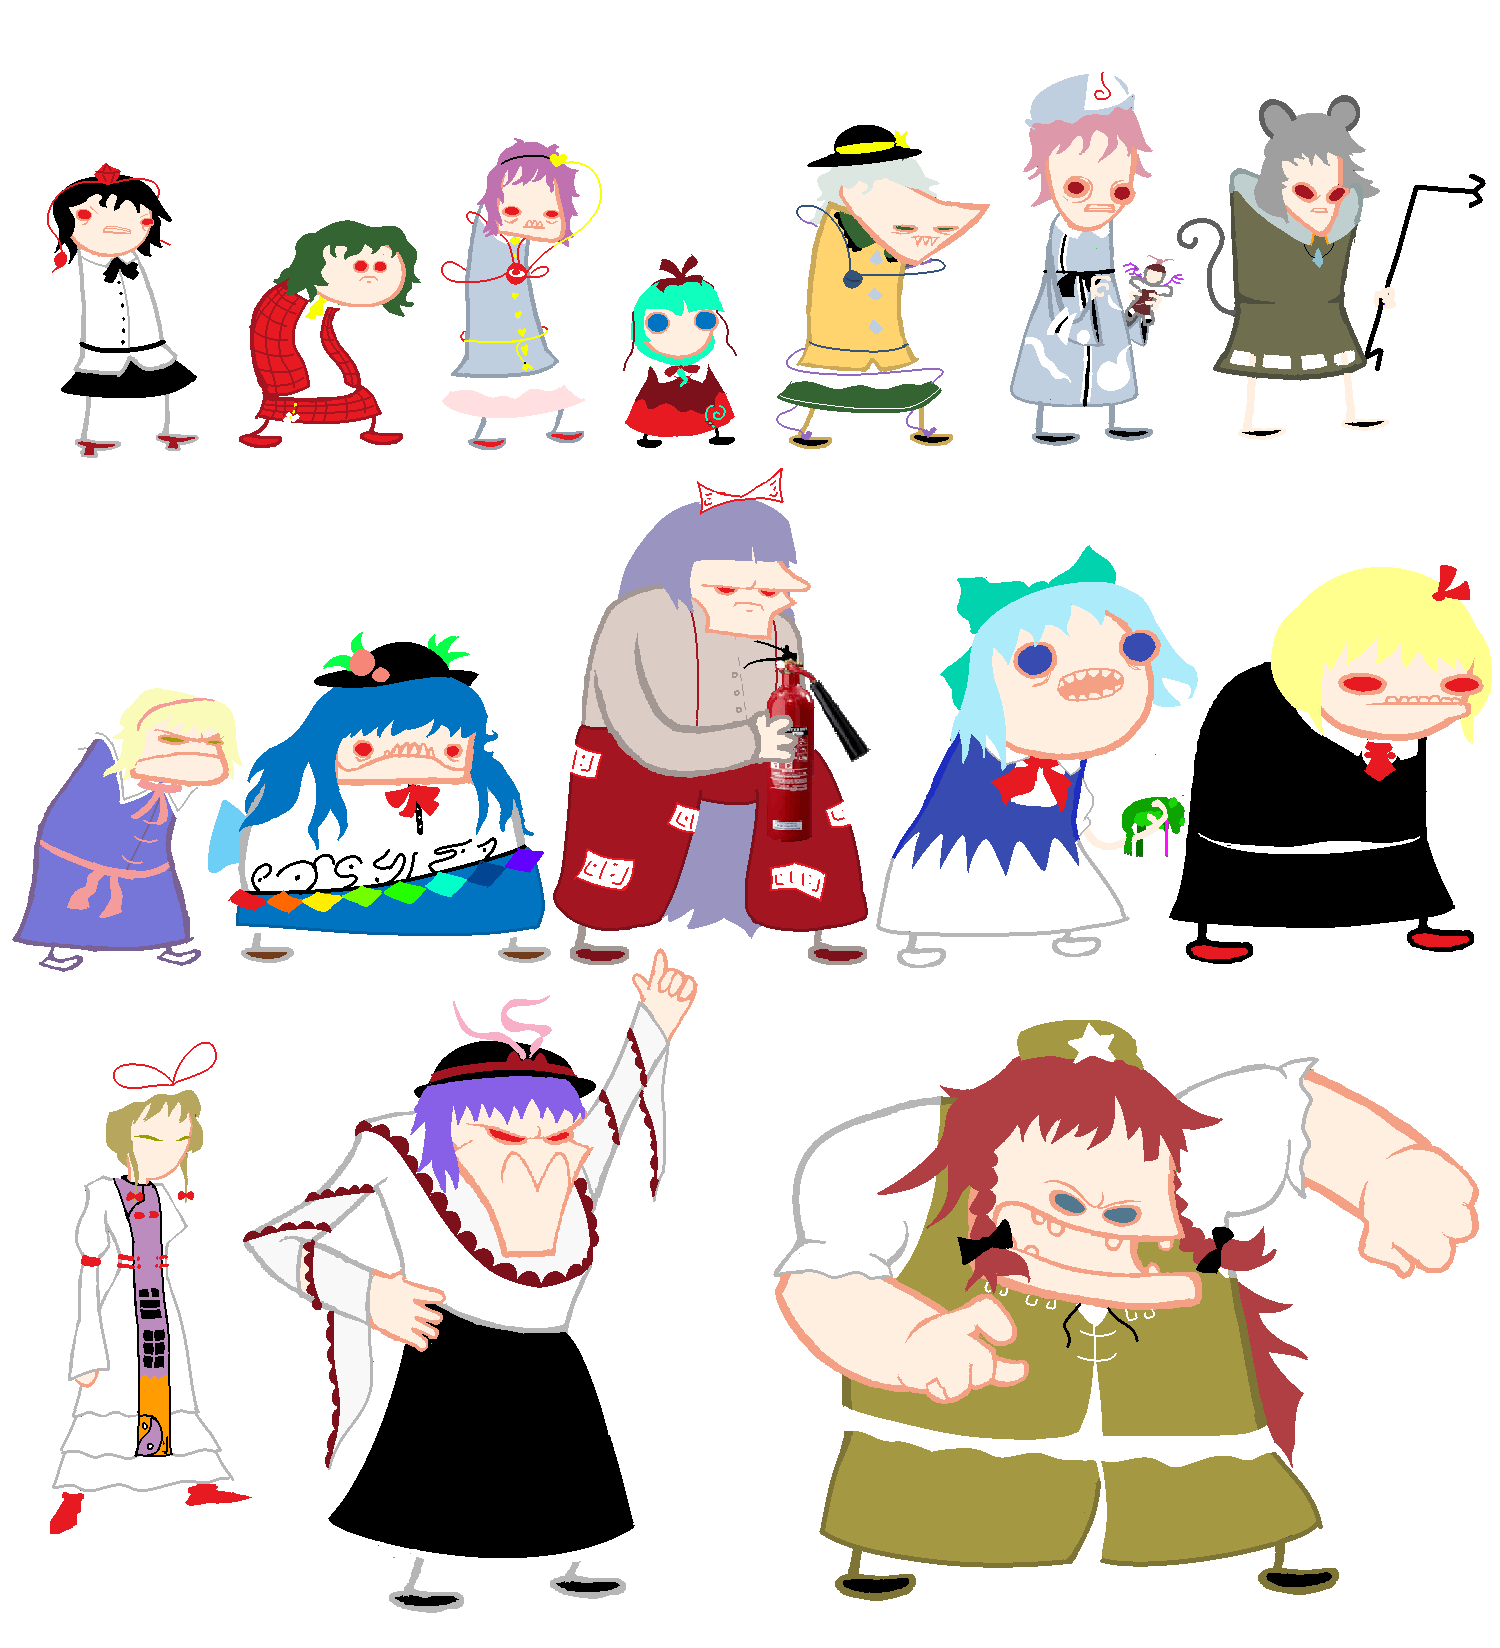 biscuits bq cans clover crossover crowbar die doze eggs felt fin image_manipulation itchy matchsticks quarters sawbuck snowman sprite_mode stitch touhou trace